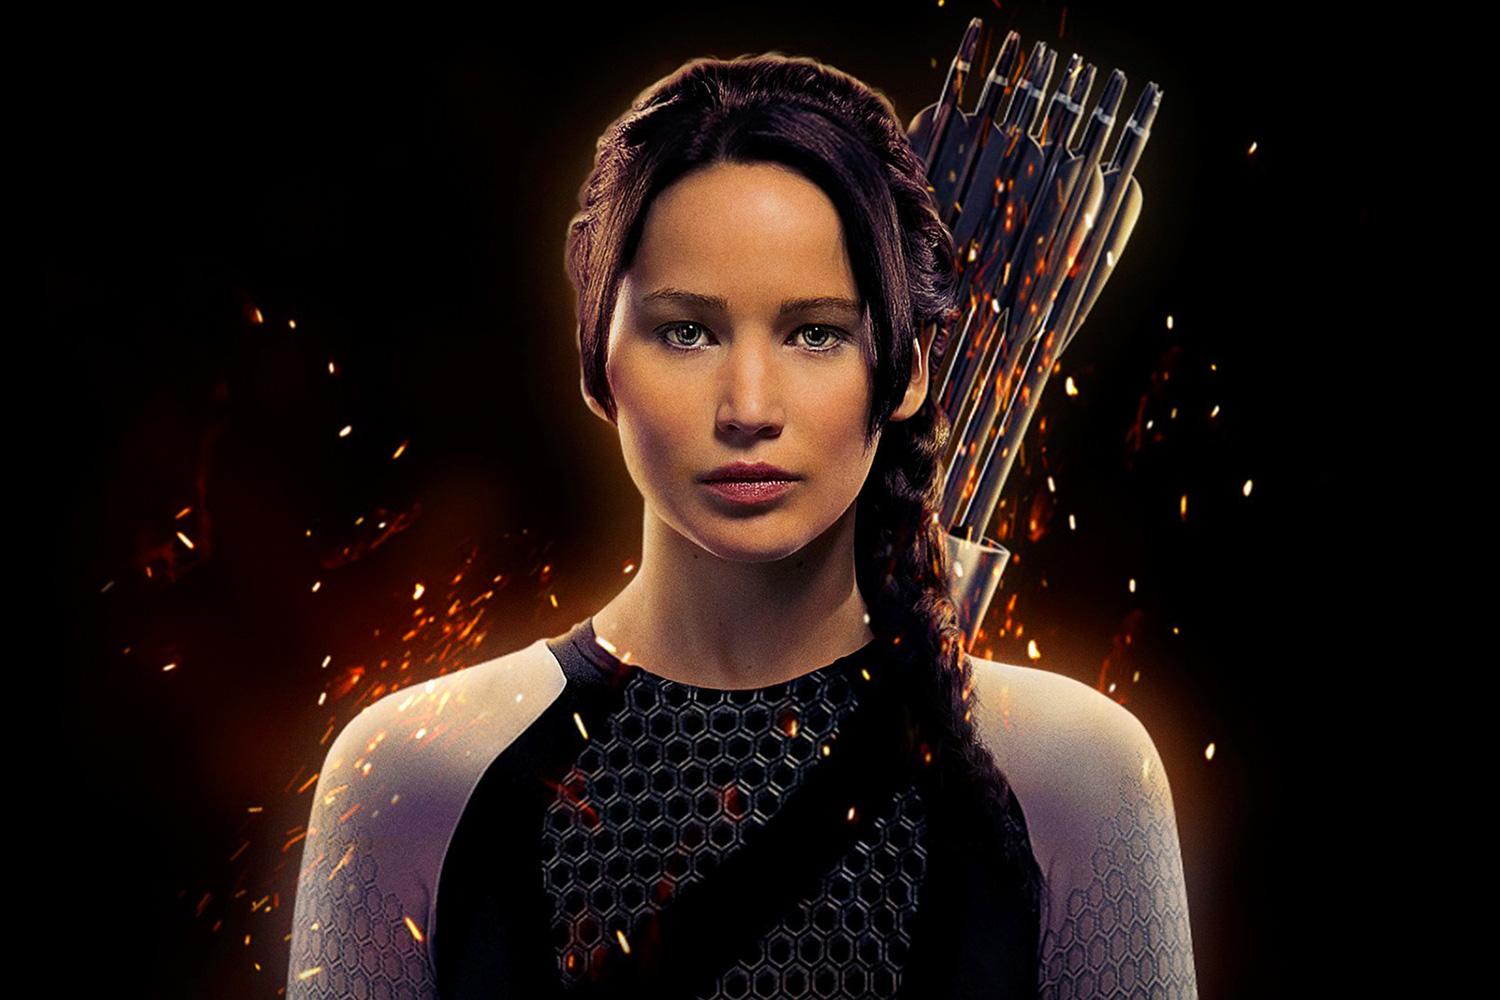 Where to Watch 'The Hunger Games' Movies – All 4 Movies Just Dropped on  This Streamer, Jennifer Lawrence, Josh Hutcherson, Liam Hemsworth, Movies,  Netflix, The Hunger Games